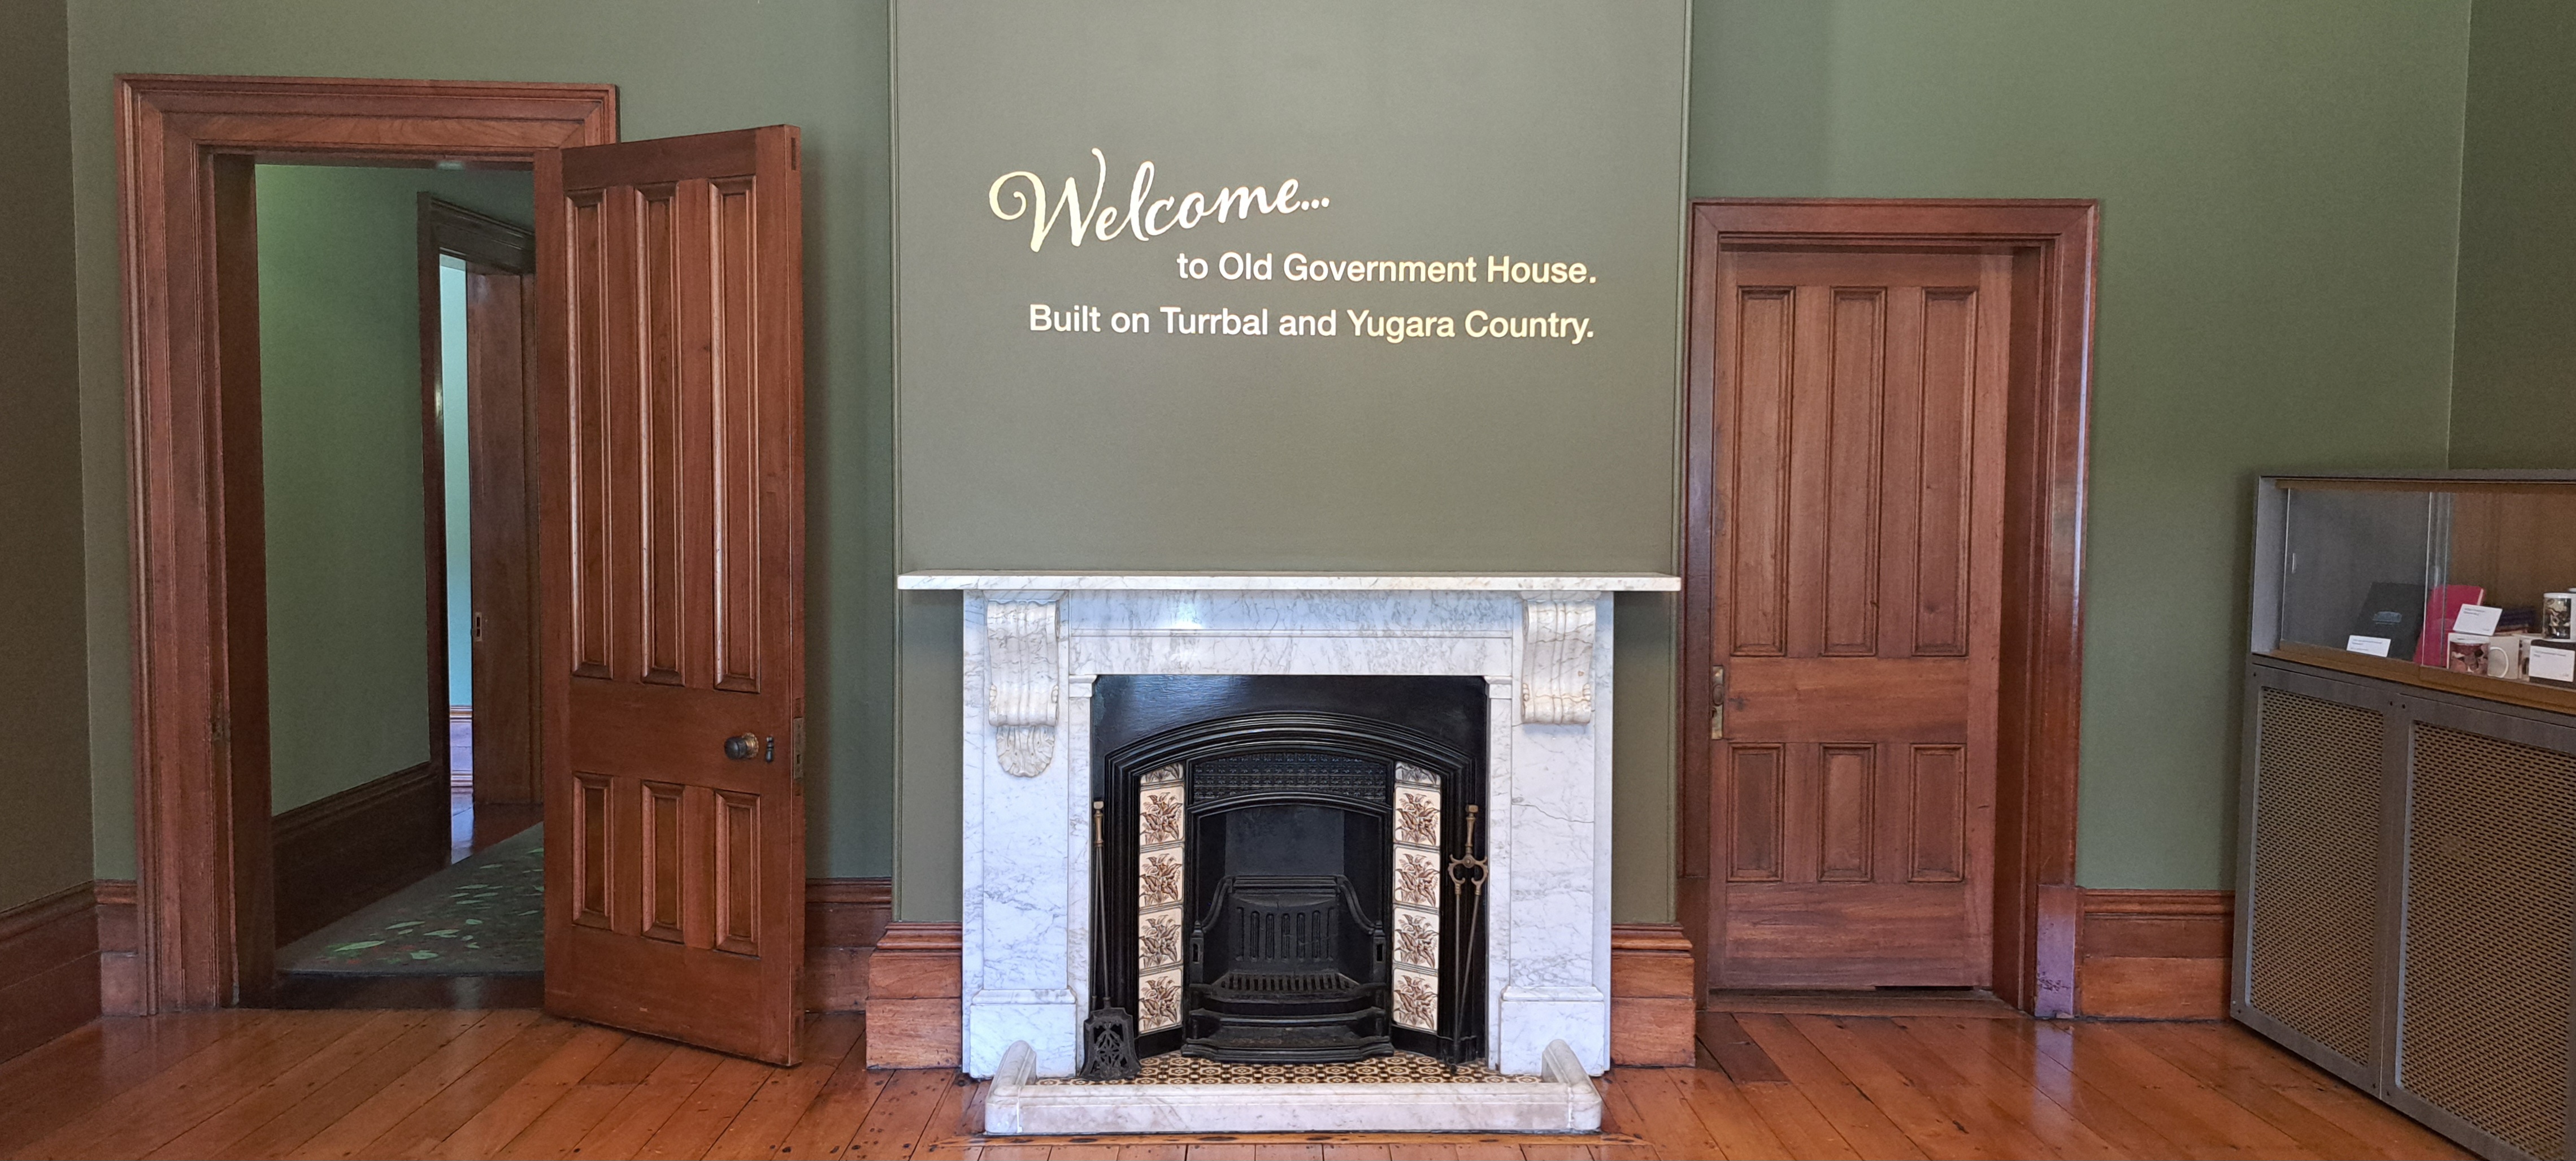 A marble fireplace in Old Government House. Above it are the words 'Welcome to Old Government House. Built on Turrbal and Yugara Country.